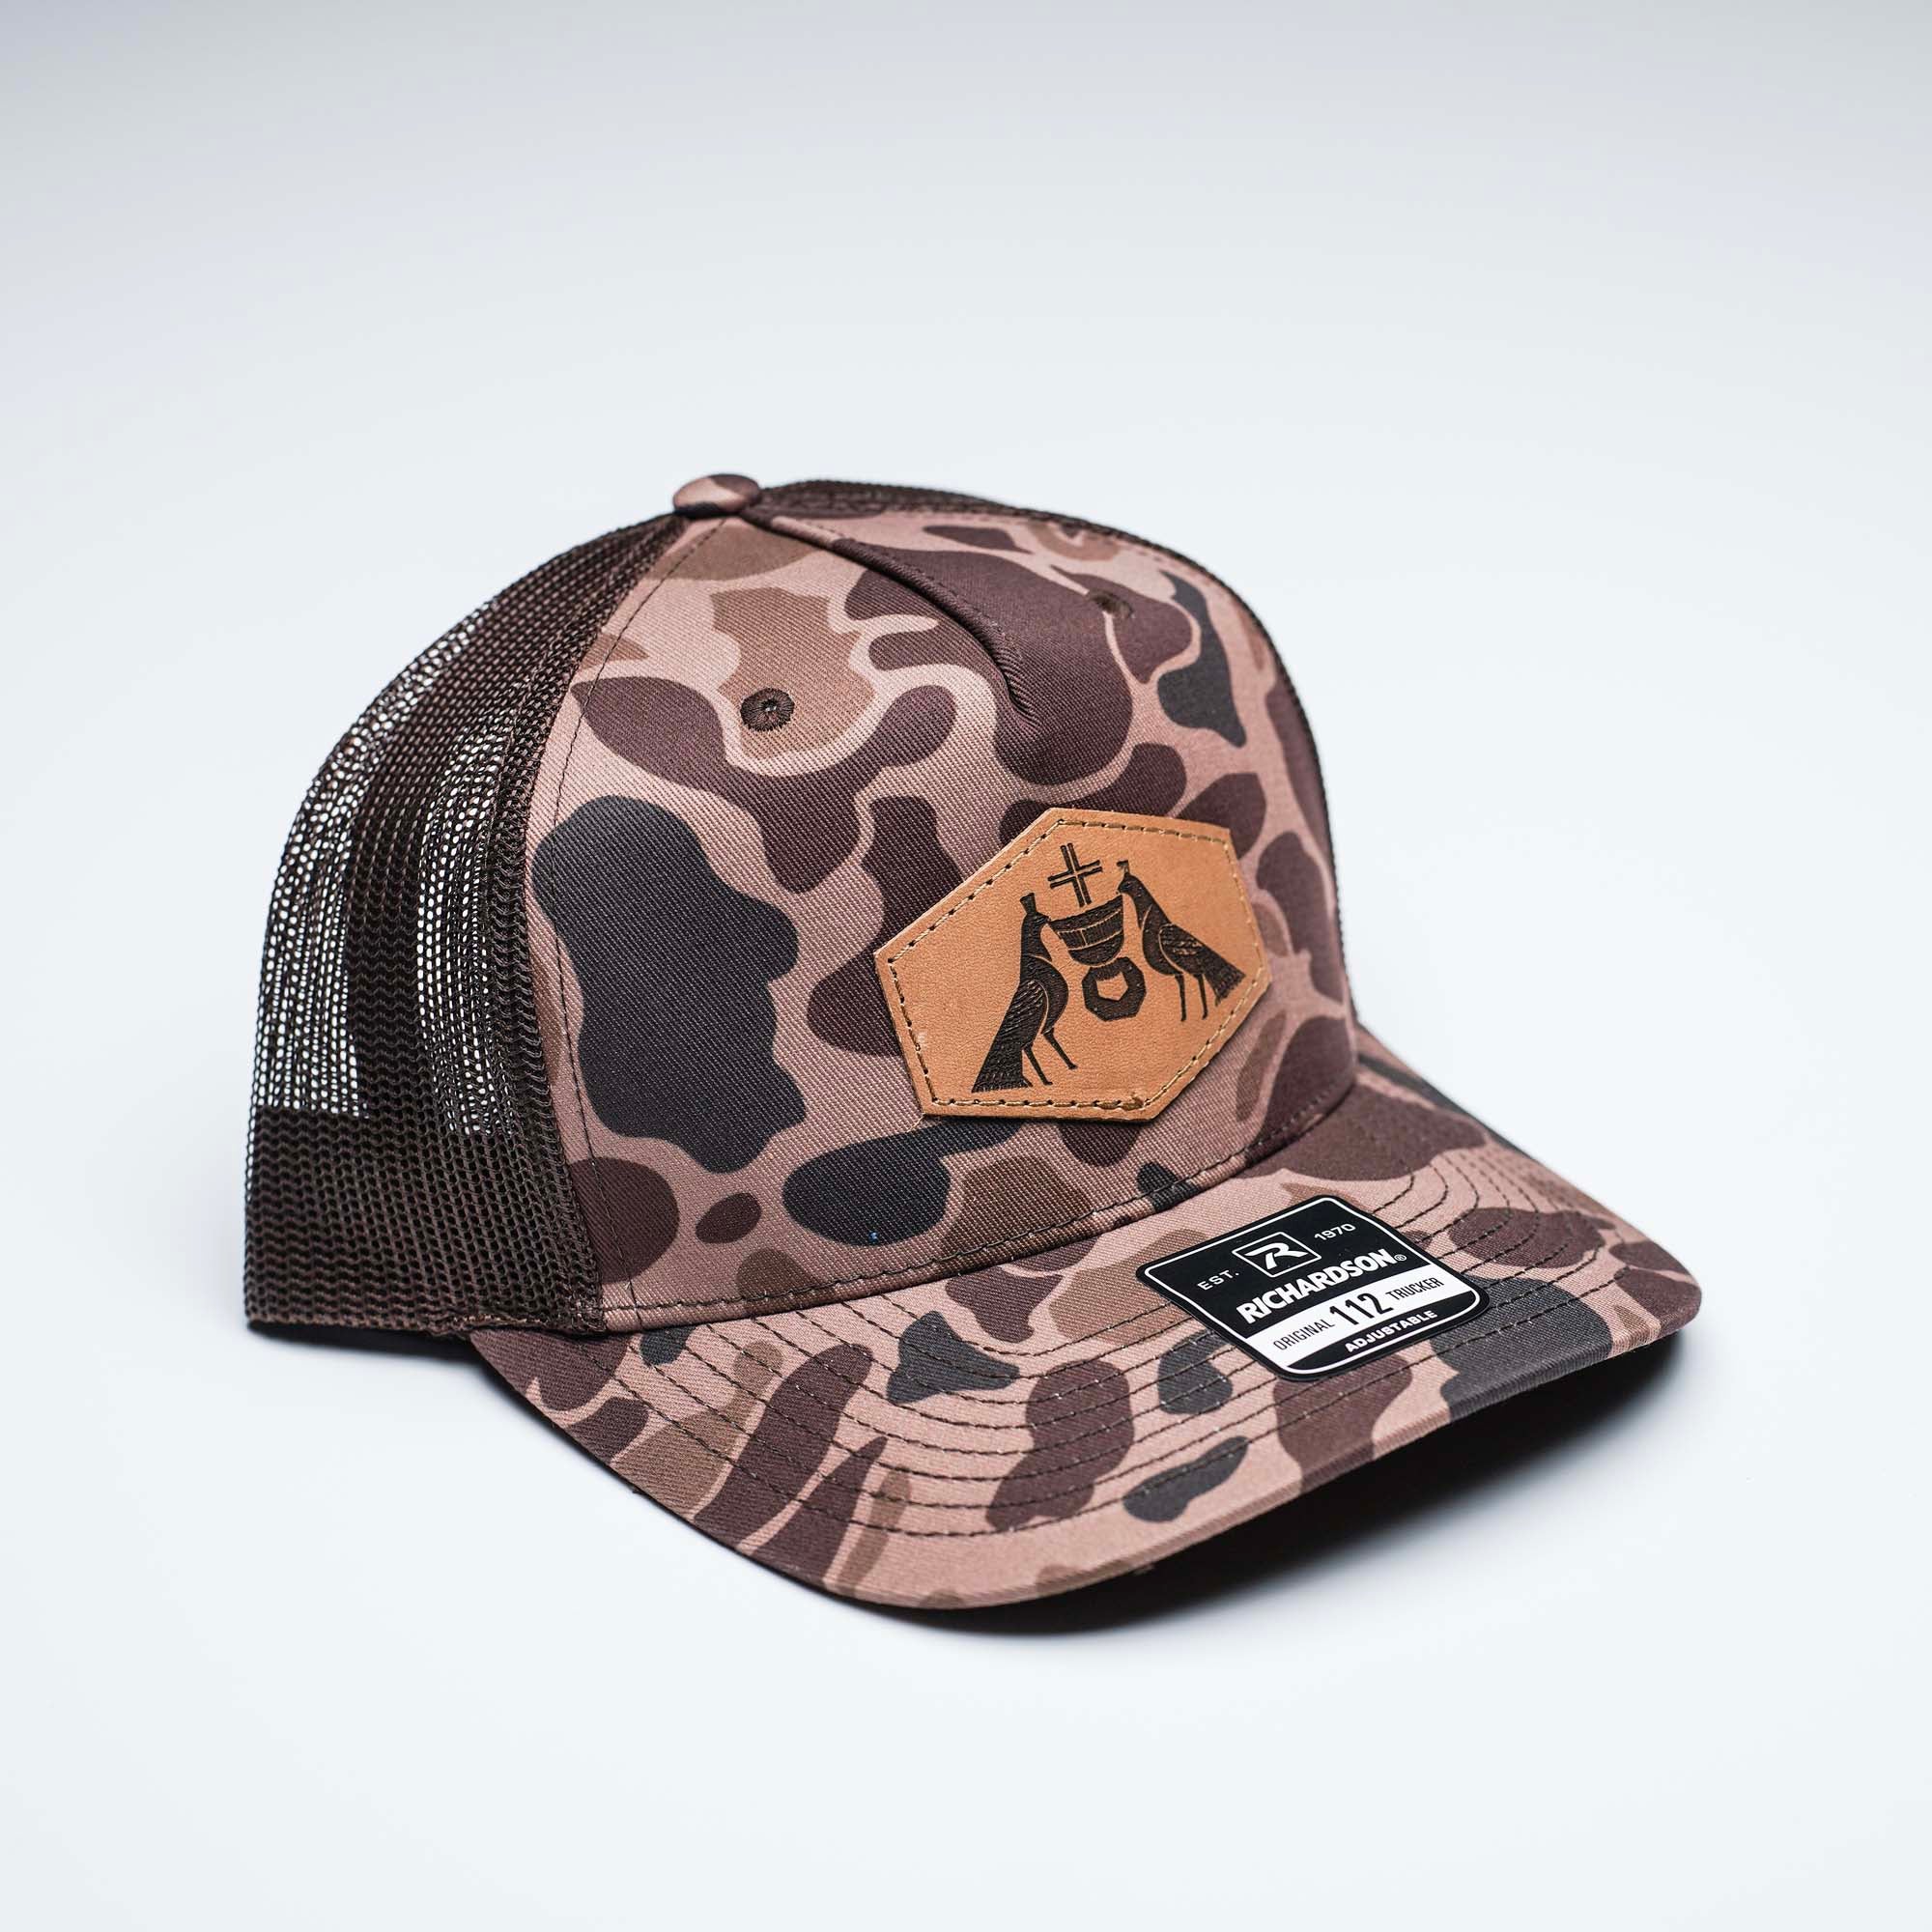 Lasered Leather Patch Trucker Hat ~ Richardson 112PFP Printed Five Panel Trucker Hat ~ Customized with YOUR LOGO